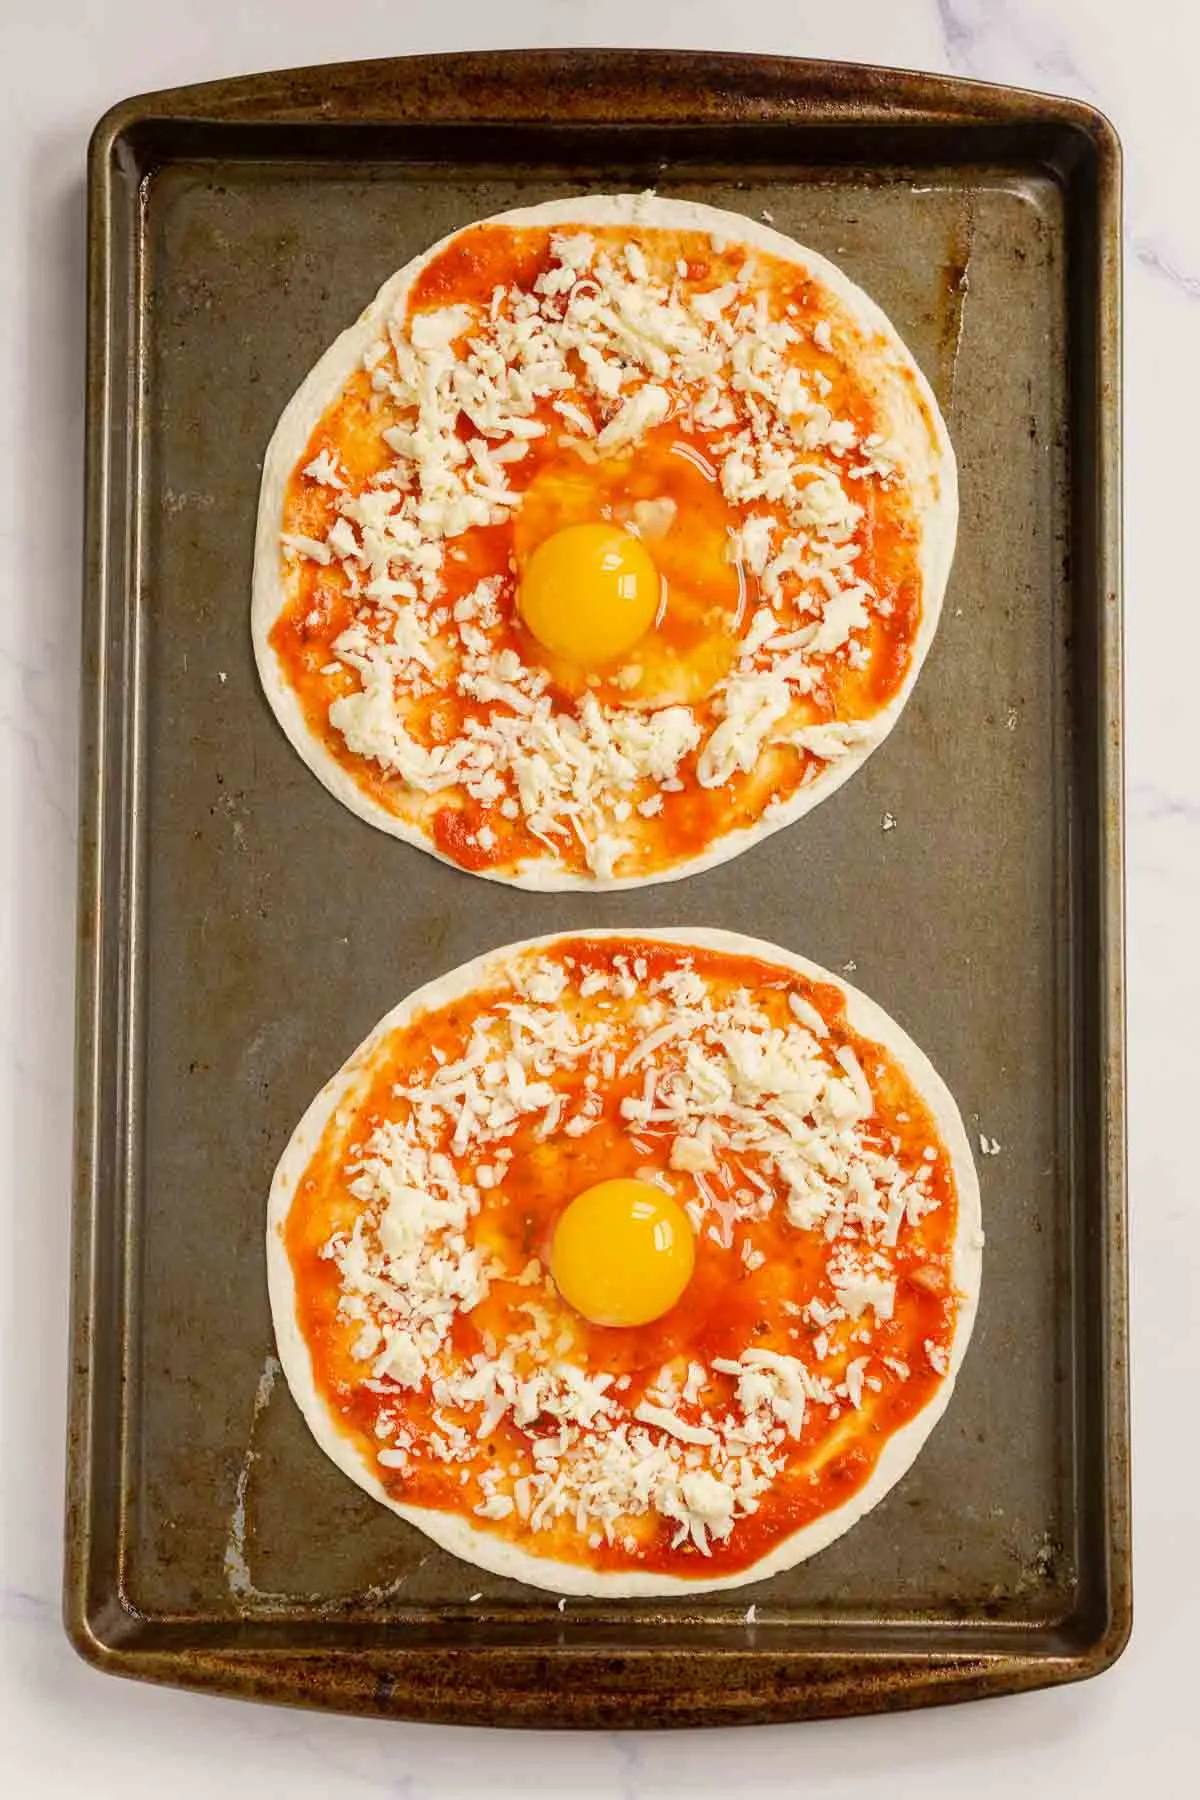 Eggs cracked in the middle of tortilla pizzas